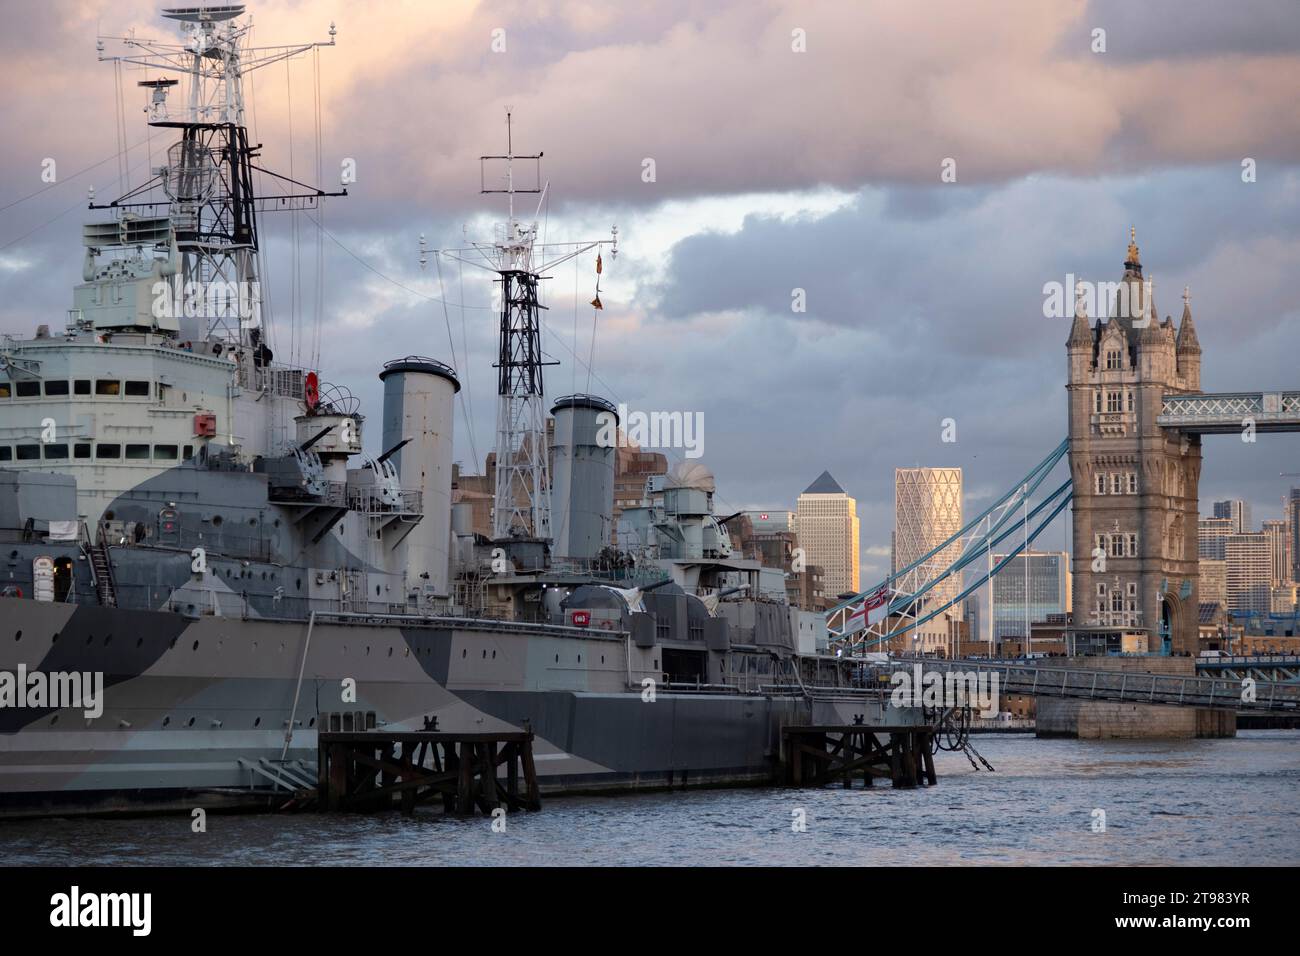 HMS Belfast on the River Thames on 15th November 2023 in London, United Kingdom. HMS Belfast is a museum ship, permanently moored in London on the River Thames. She was originally a Royal Navy light cruiser and served during the Second World War and Korean War. Stock Photo